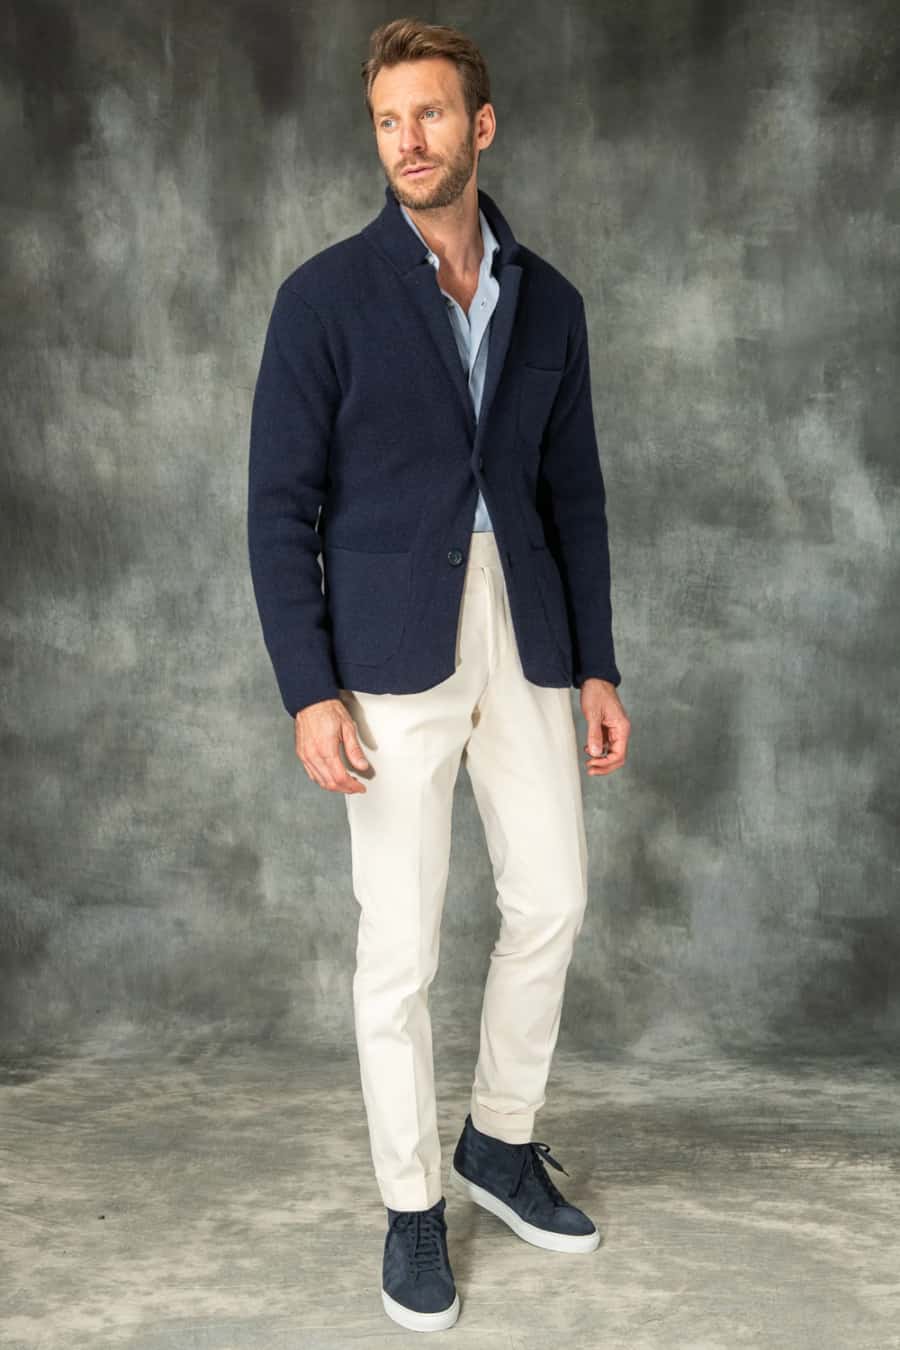 Men's white trousers, blue Oxford shirt, navy knitted blazer and navy sneakers outfit